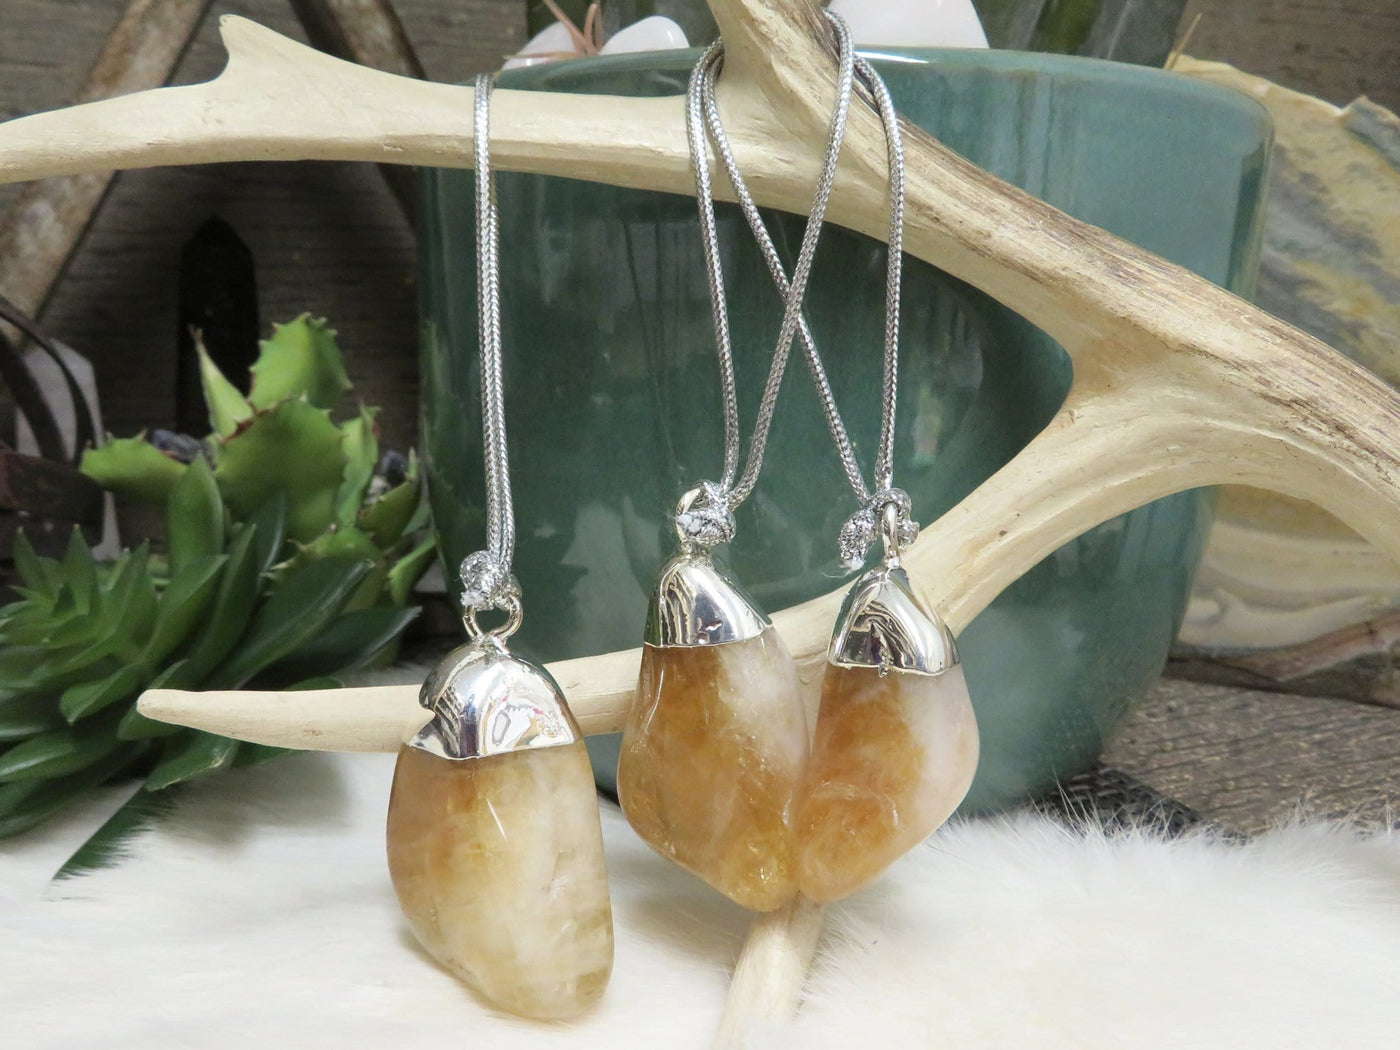 Citrine Polished Crystal Ornament in silver electroplated cap with silver string